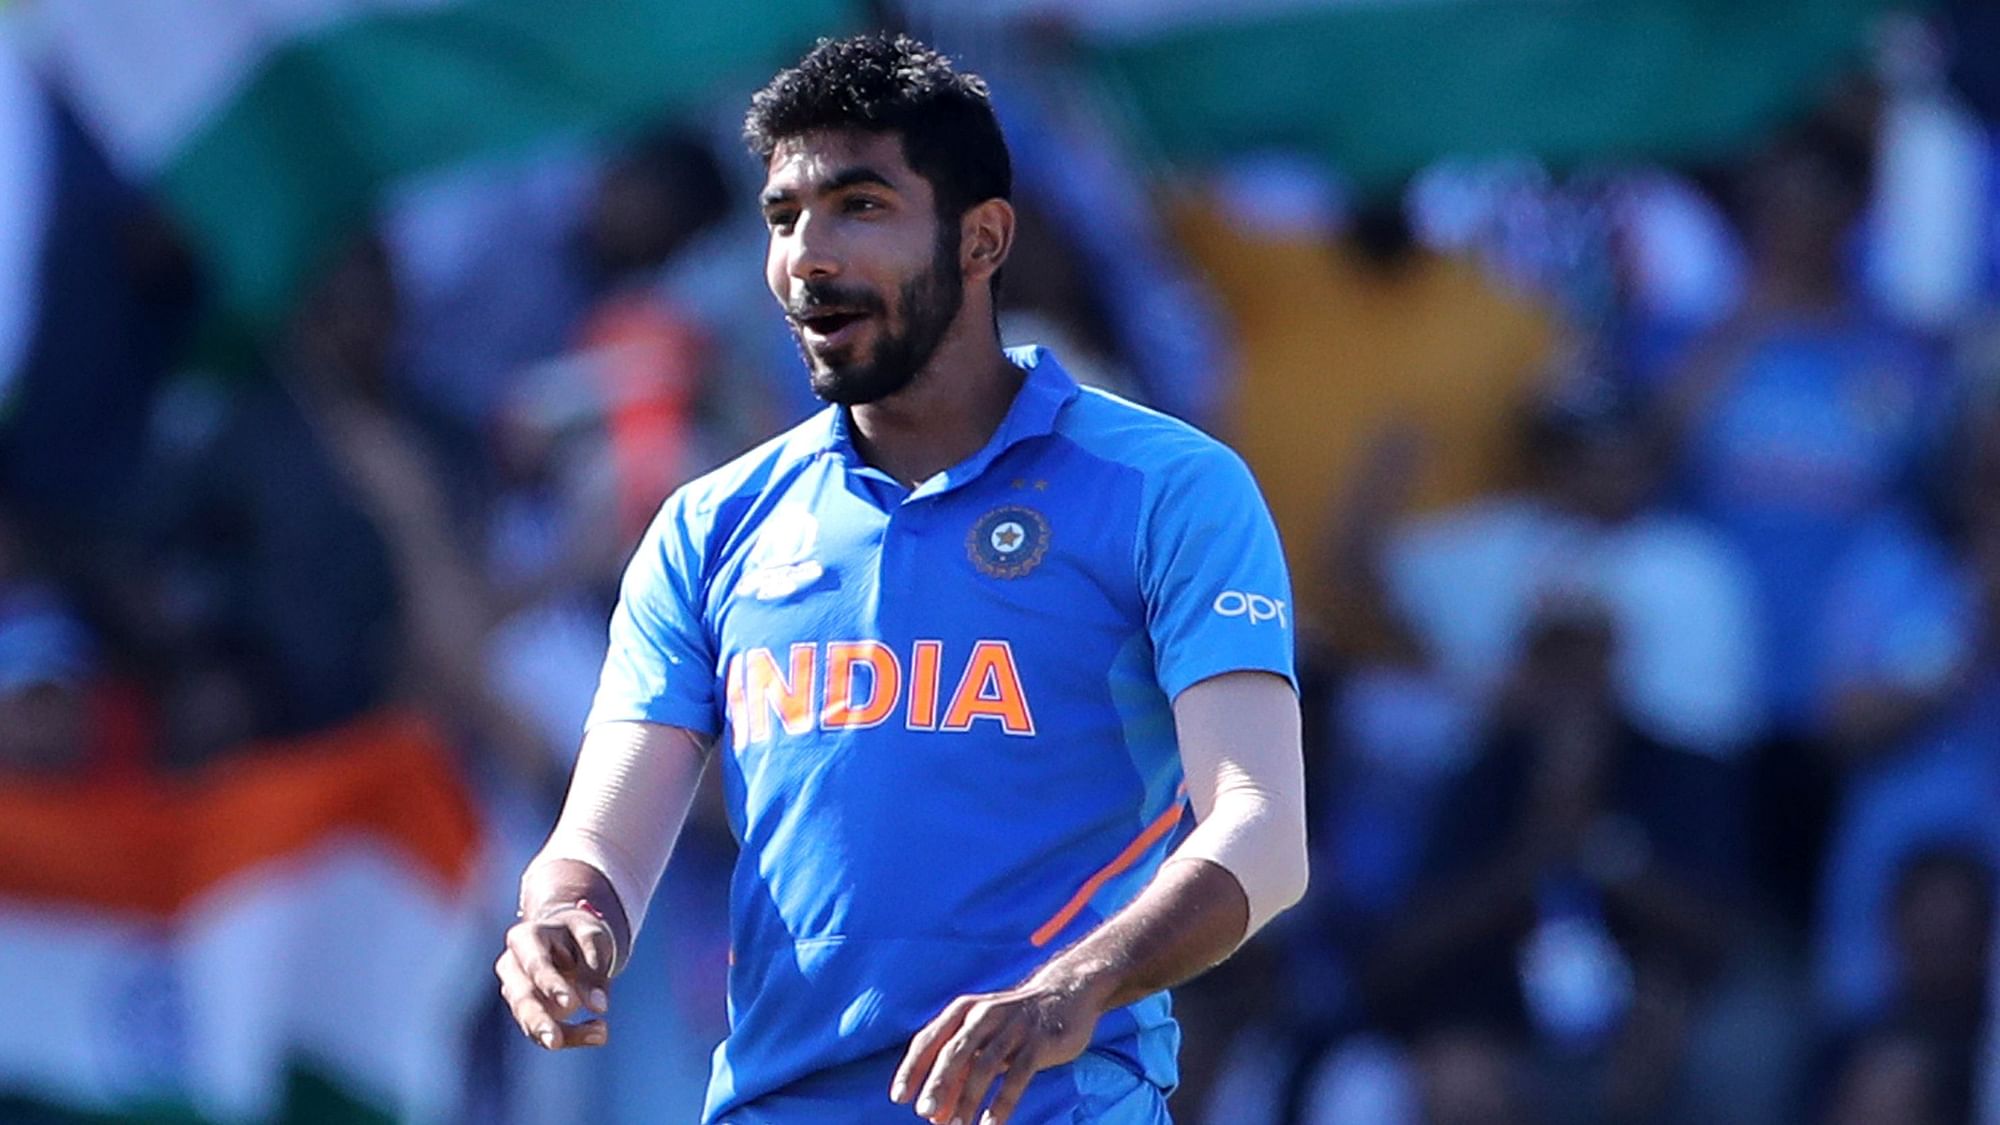 Injured India speedster Jasprit Bumrah has been working on his strength and fitness under Delhi Capitals trainer Rajnikanth Sivagnanam.